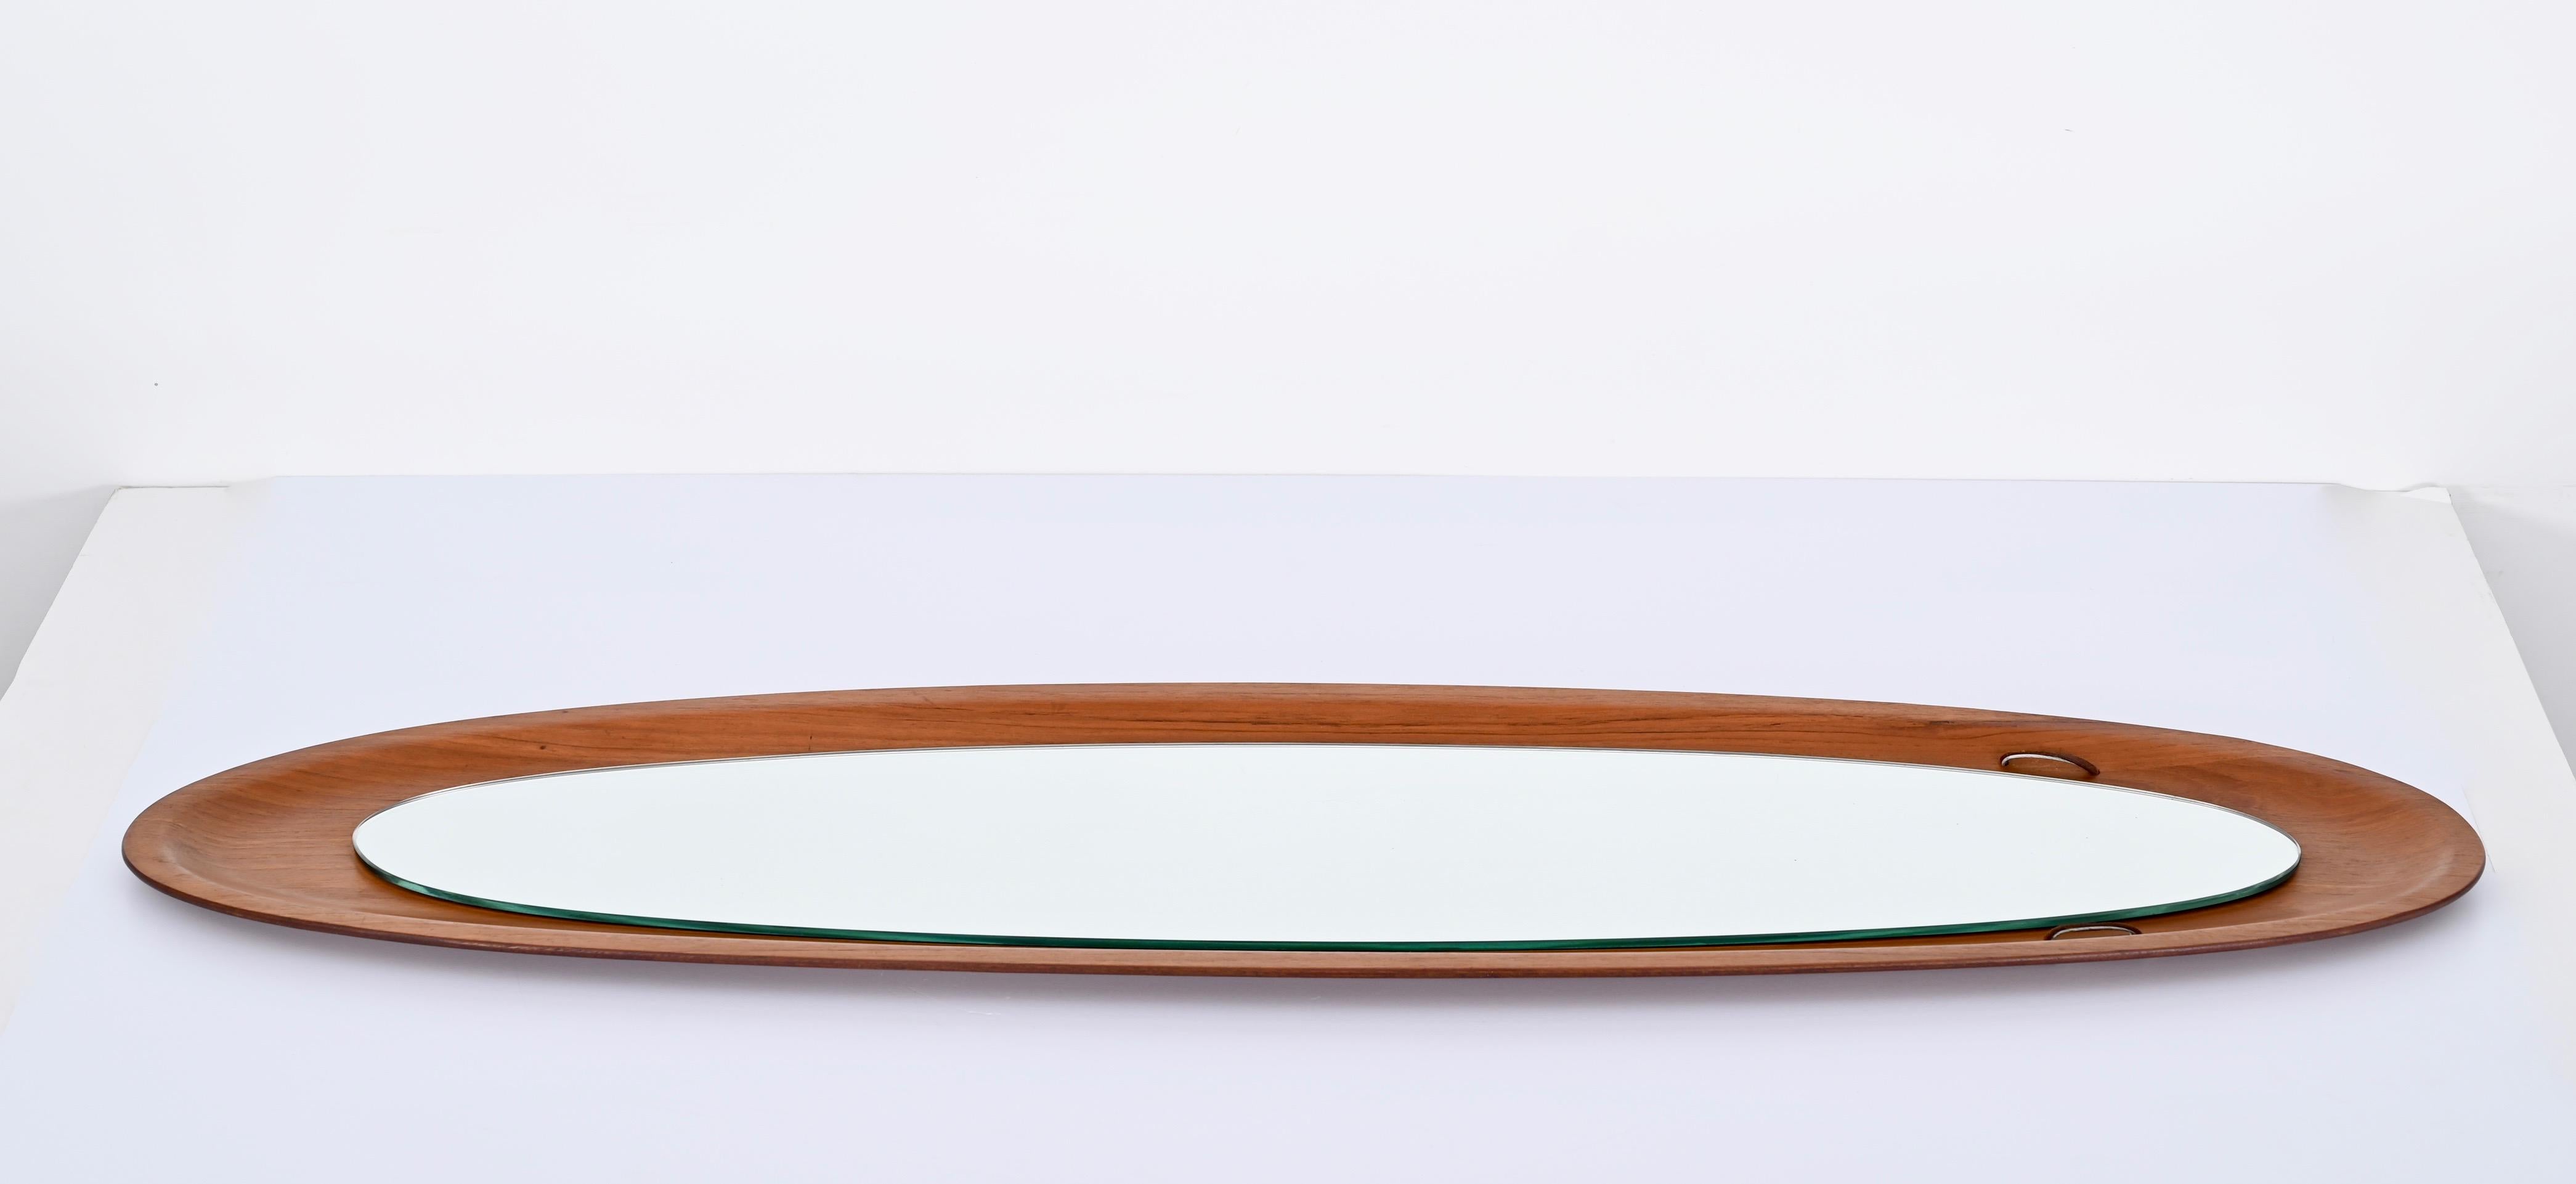 Carved Mid-Century Campo & Graffi Curved Teak Wood Oval Wall Mirror, Italy, 1960s For Sale